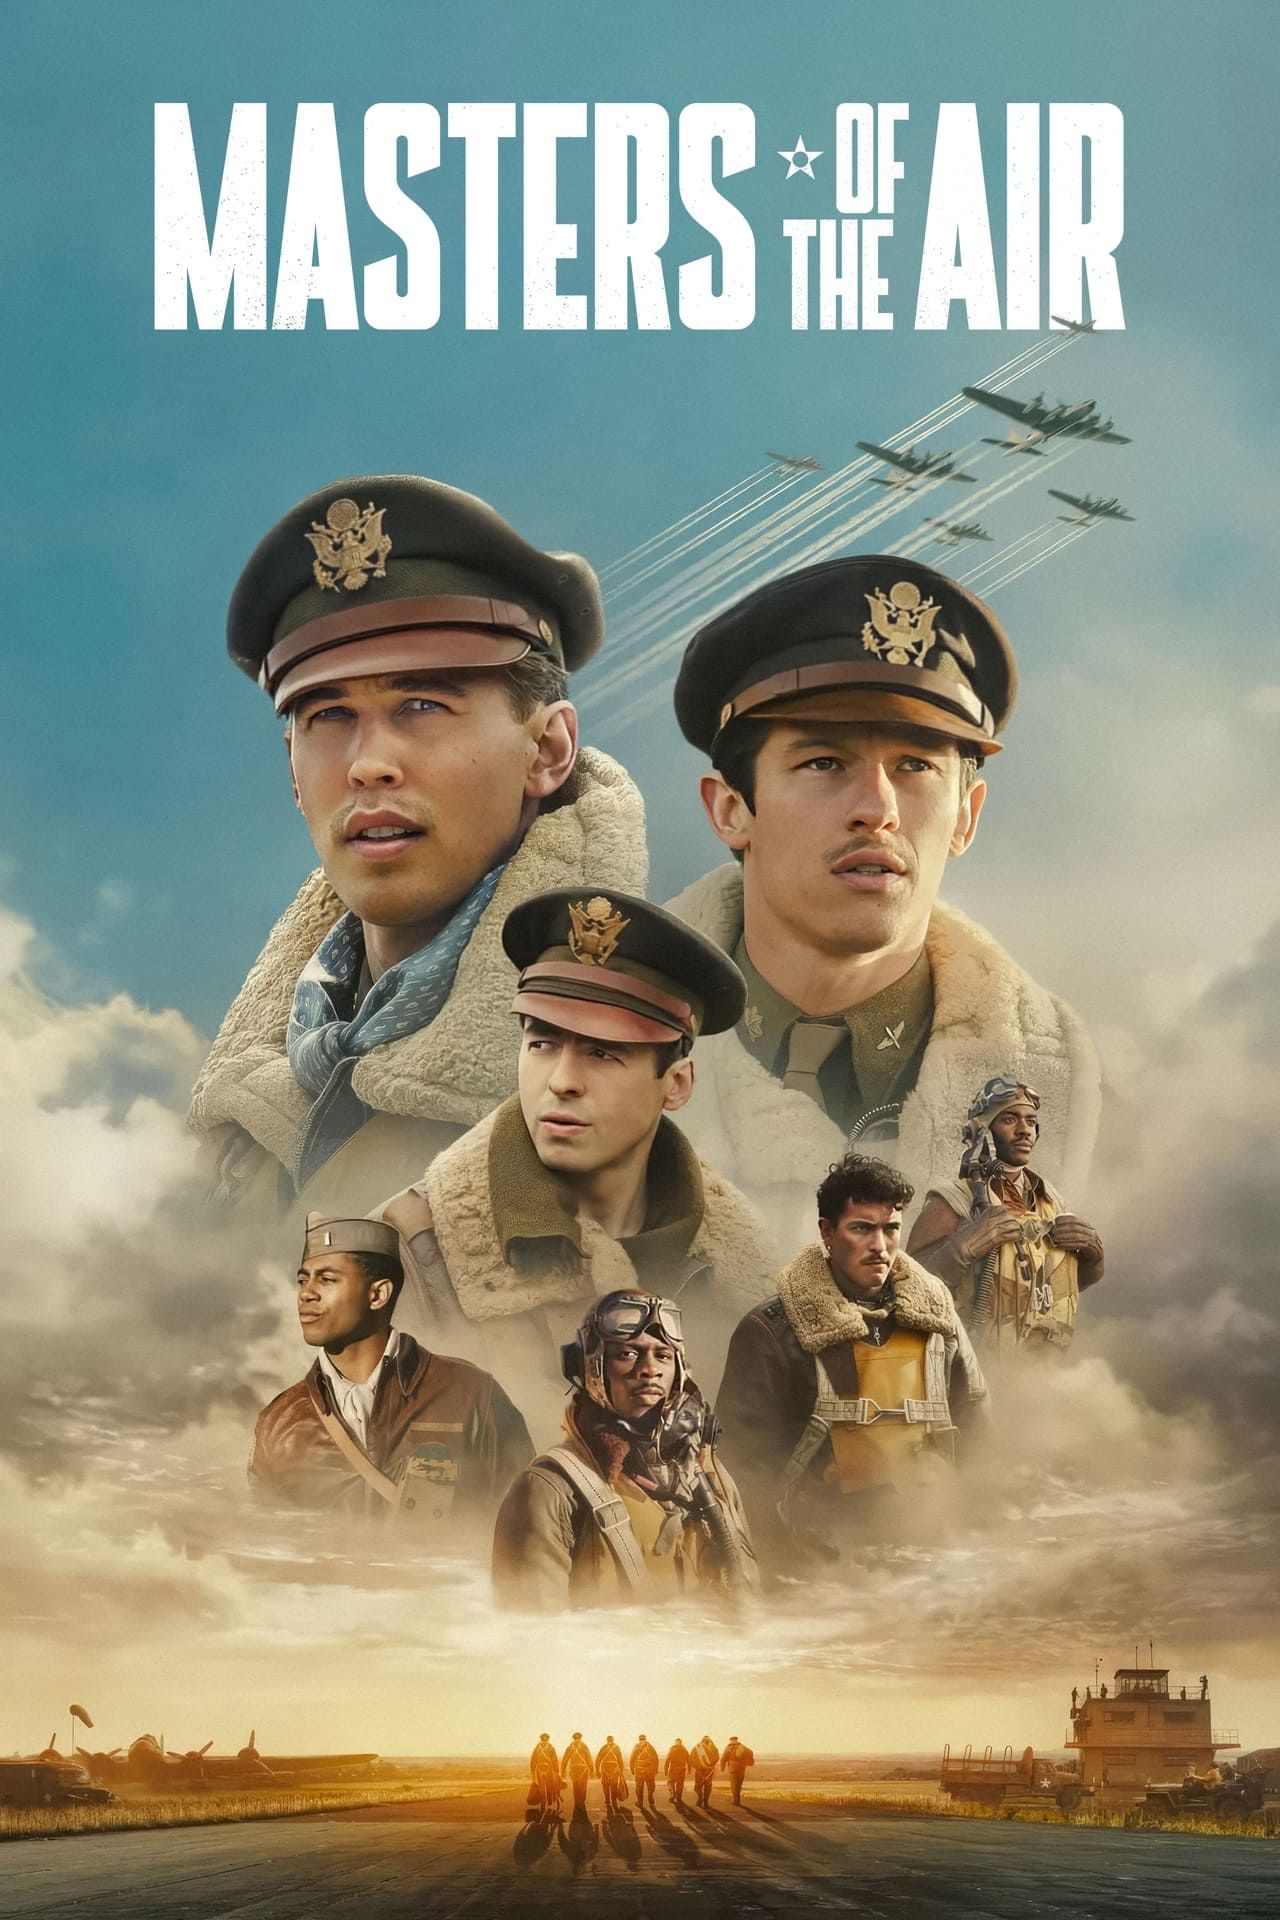 Masters Of The Air Review An Inspiring & Harrowing Look At WWII From